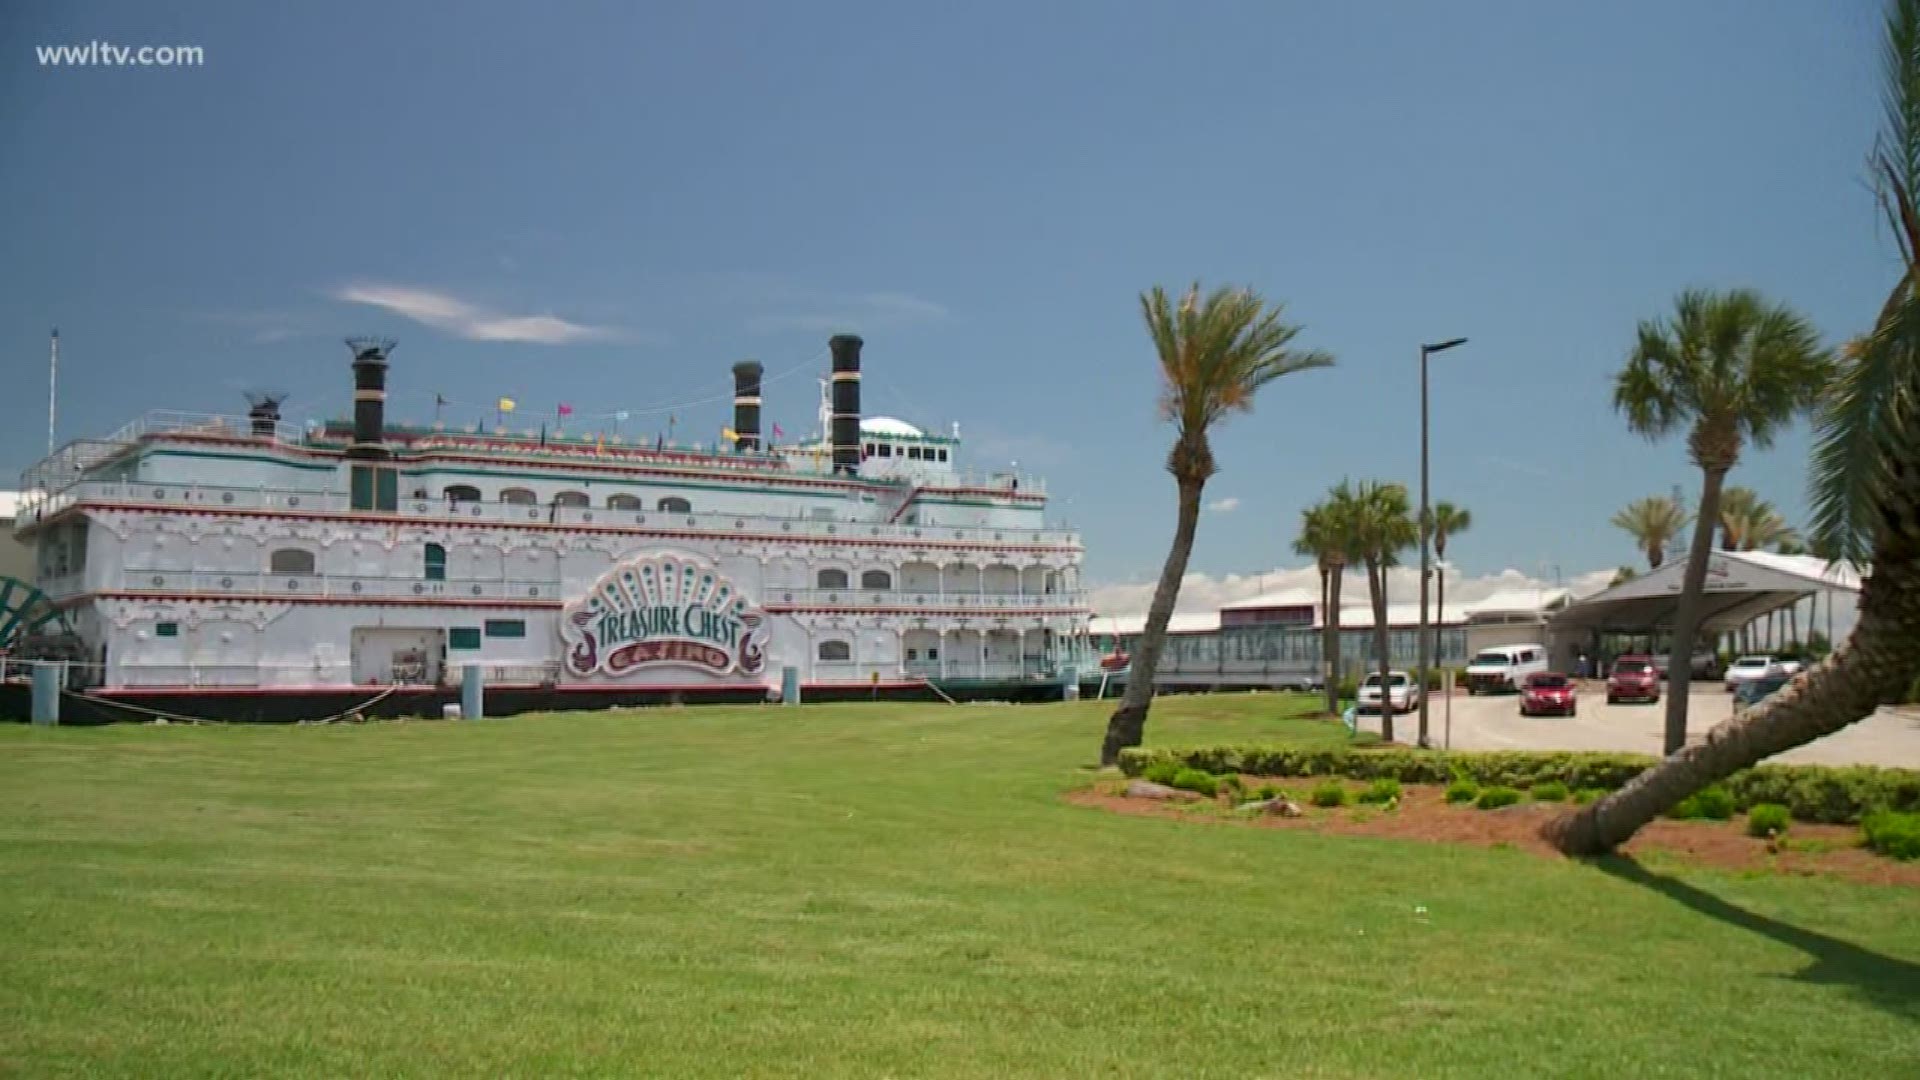 Loyal patrons said goodbye to the Treasure Chest Casino Riverboat in the most New Orleans fashion – with a second line.